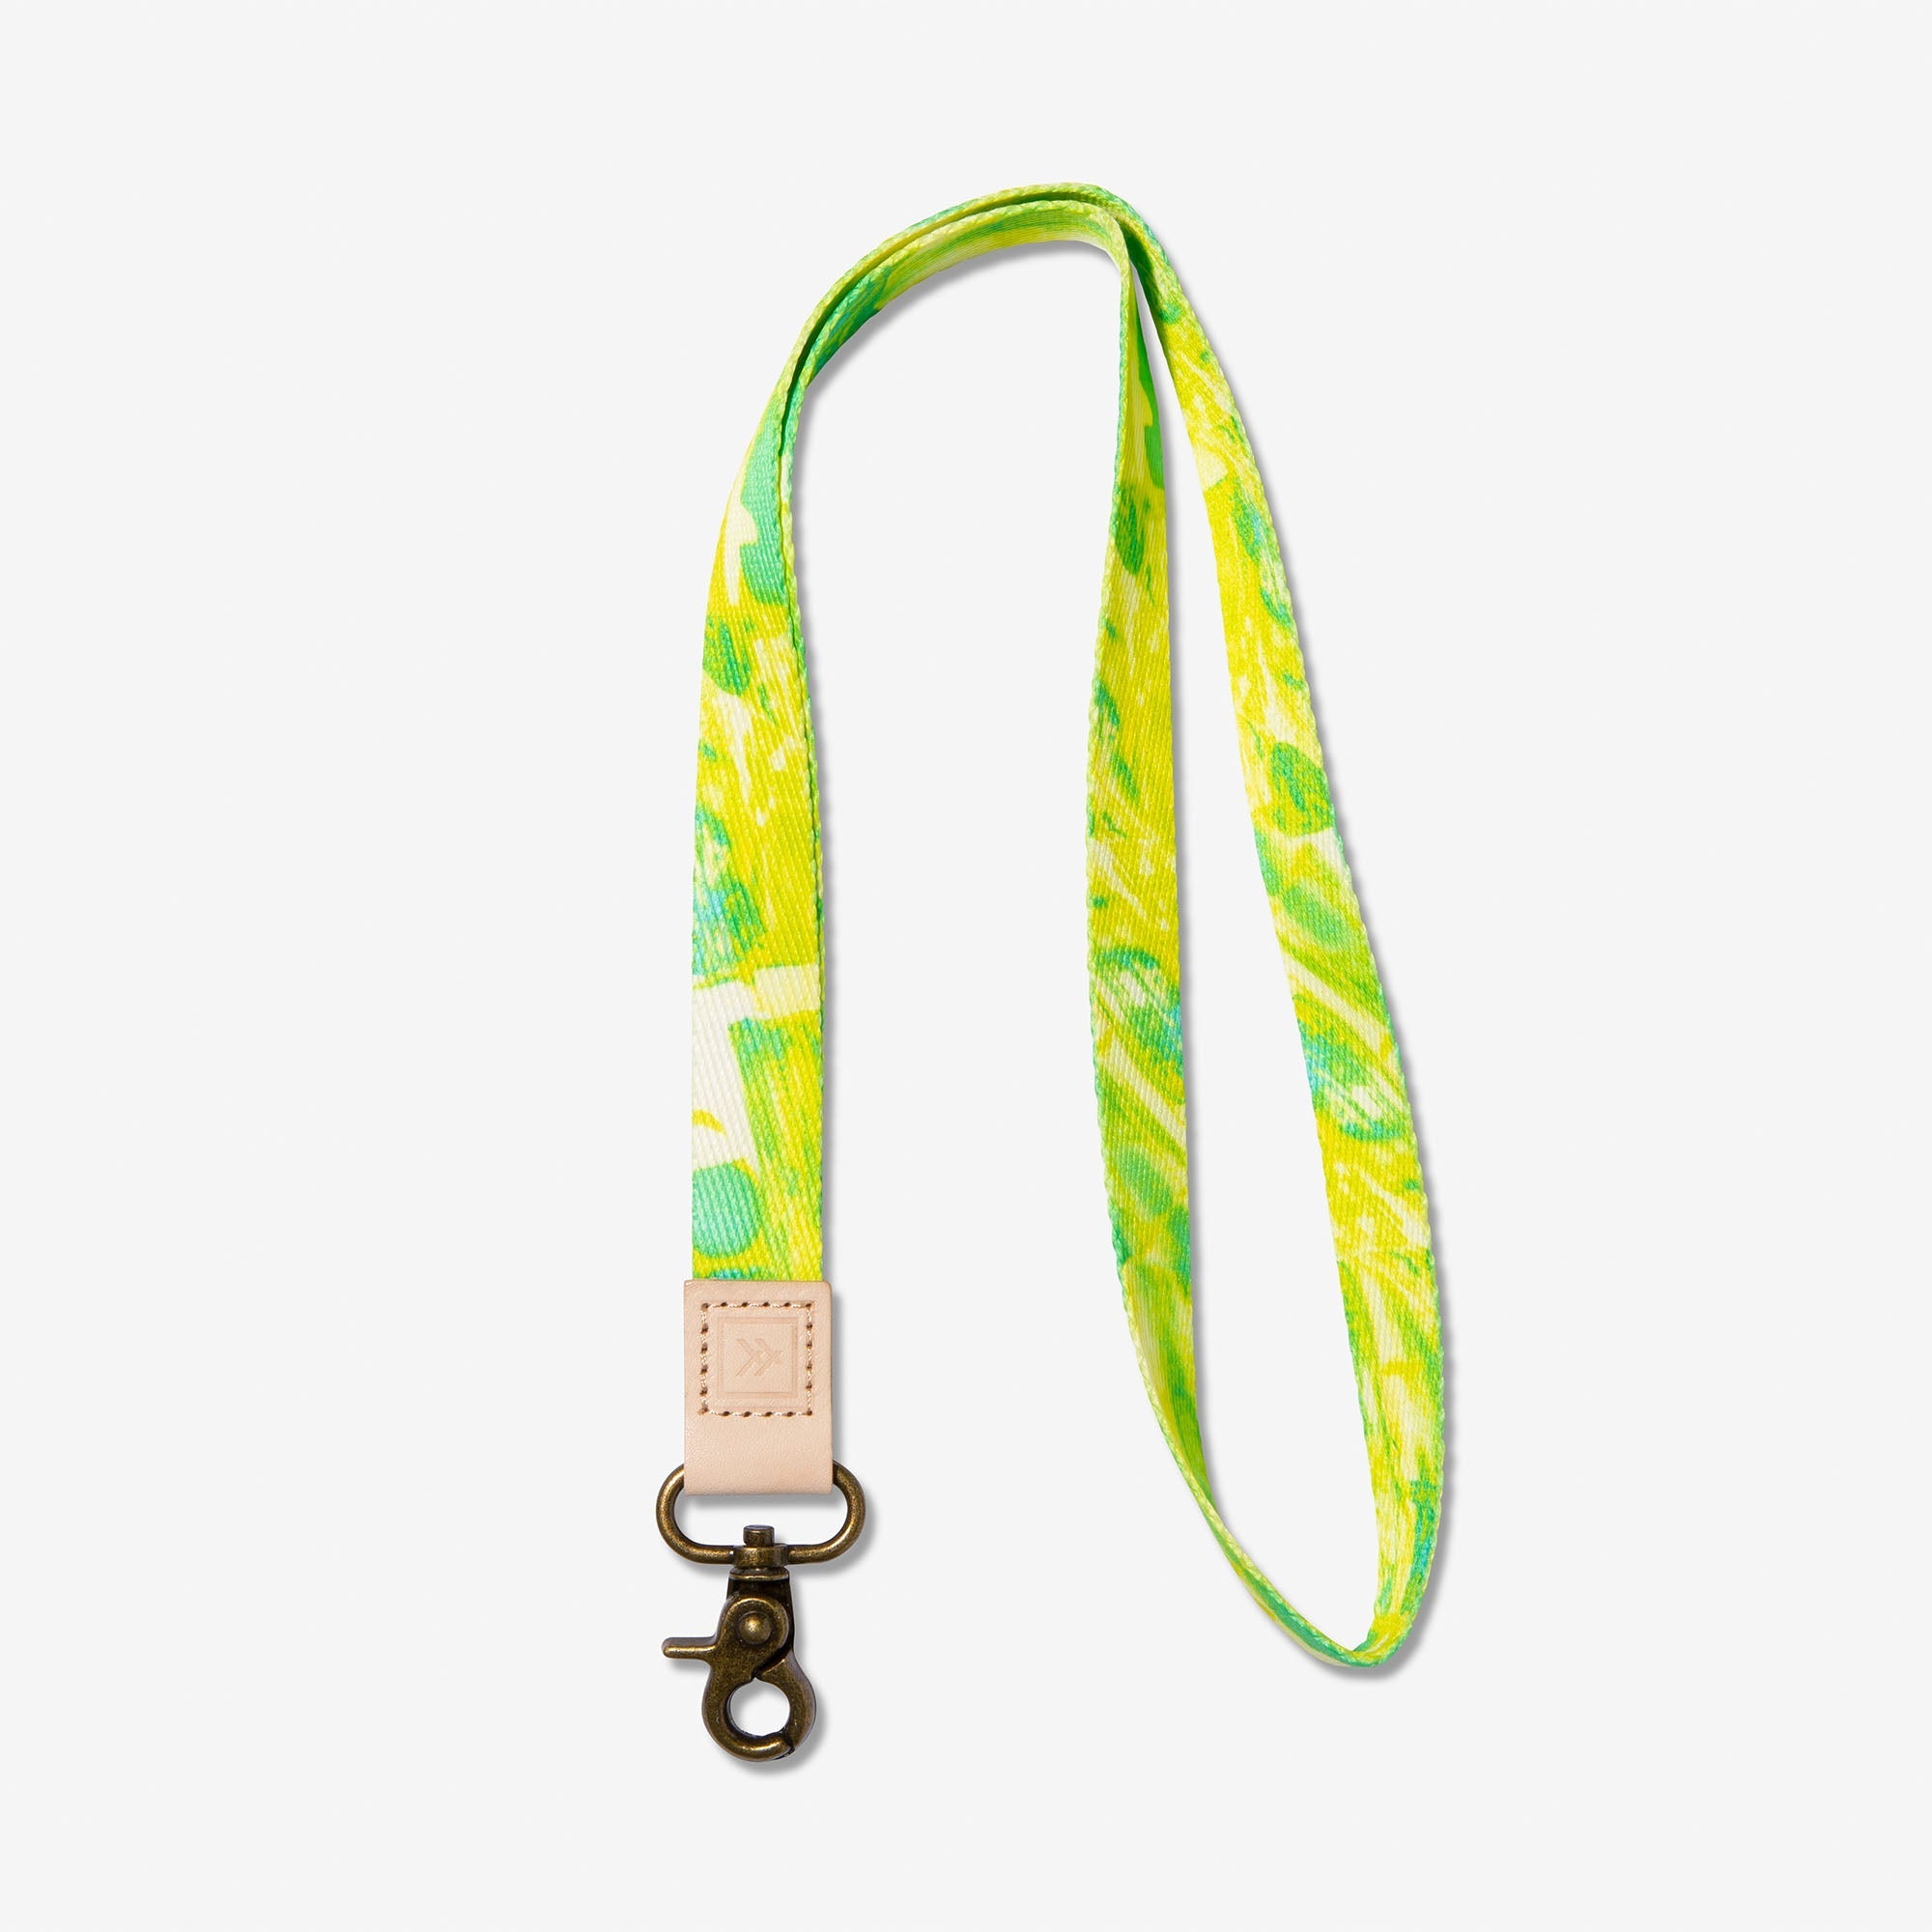 Chartreuse and green neck lanyard